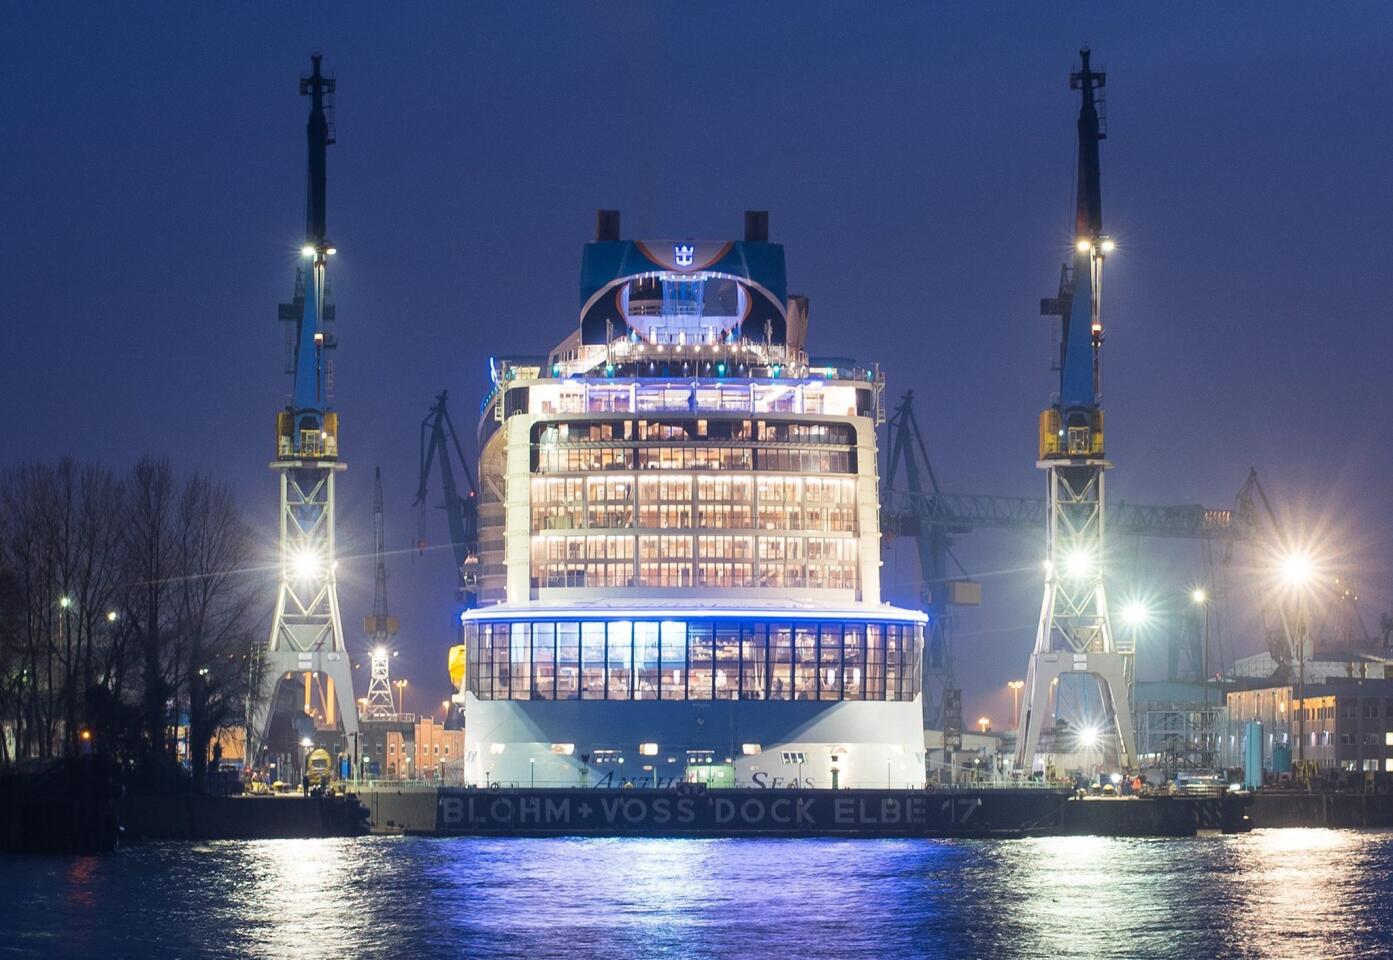 Anthem of the Seas awaits final checks prior to entry at the Blohm + Voss dock in Hamburg, Germany. It was built by German company Meyer Werft.